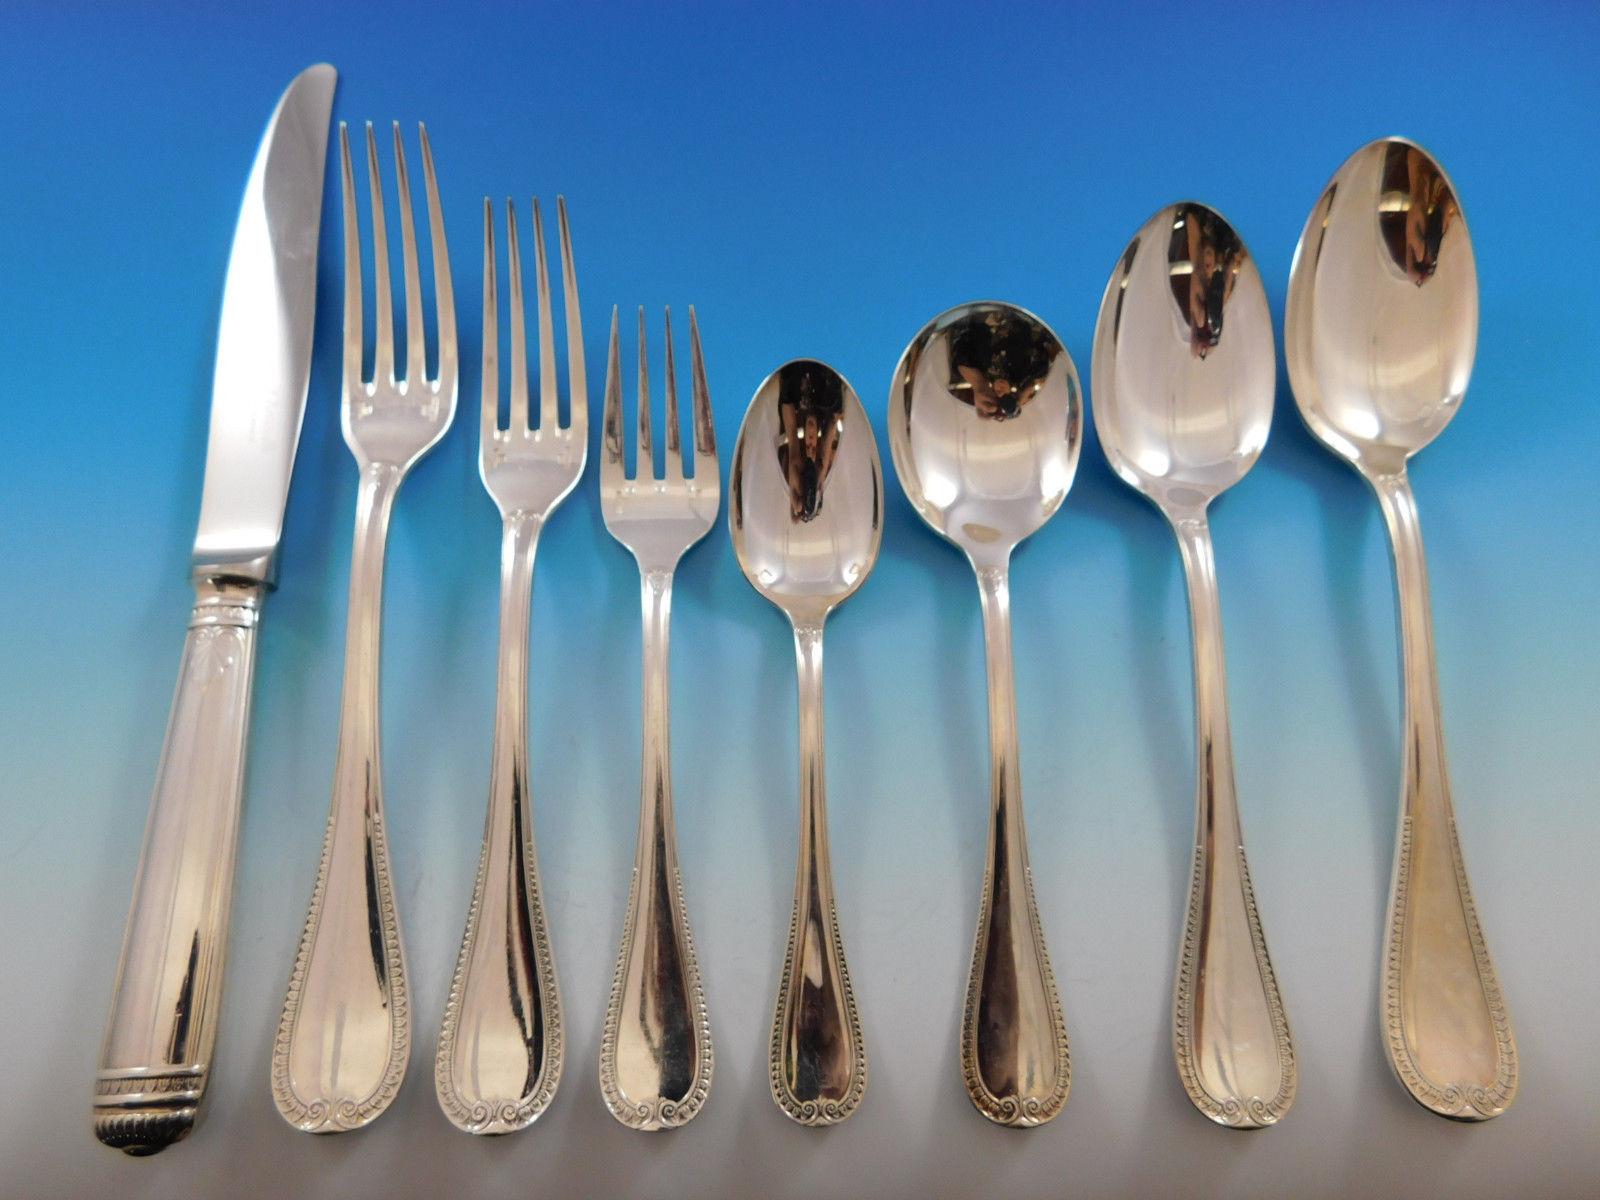 Monumental dinner size Malmaison by Christofle silver plate flatware set 106 pieces. This set includes:

12 dinner knives, 10